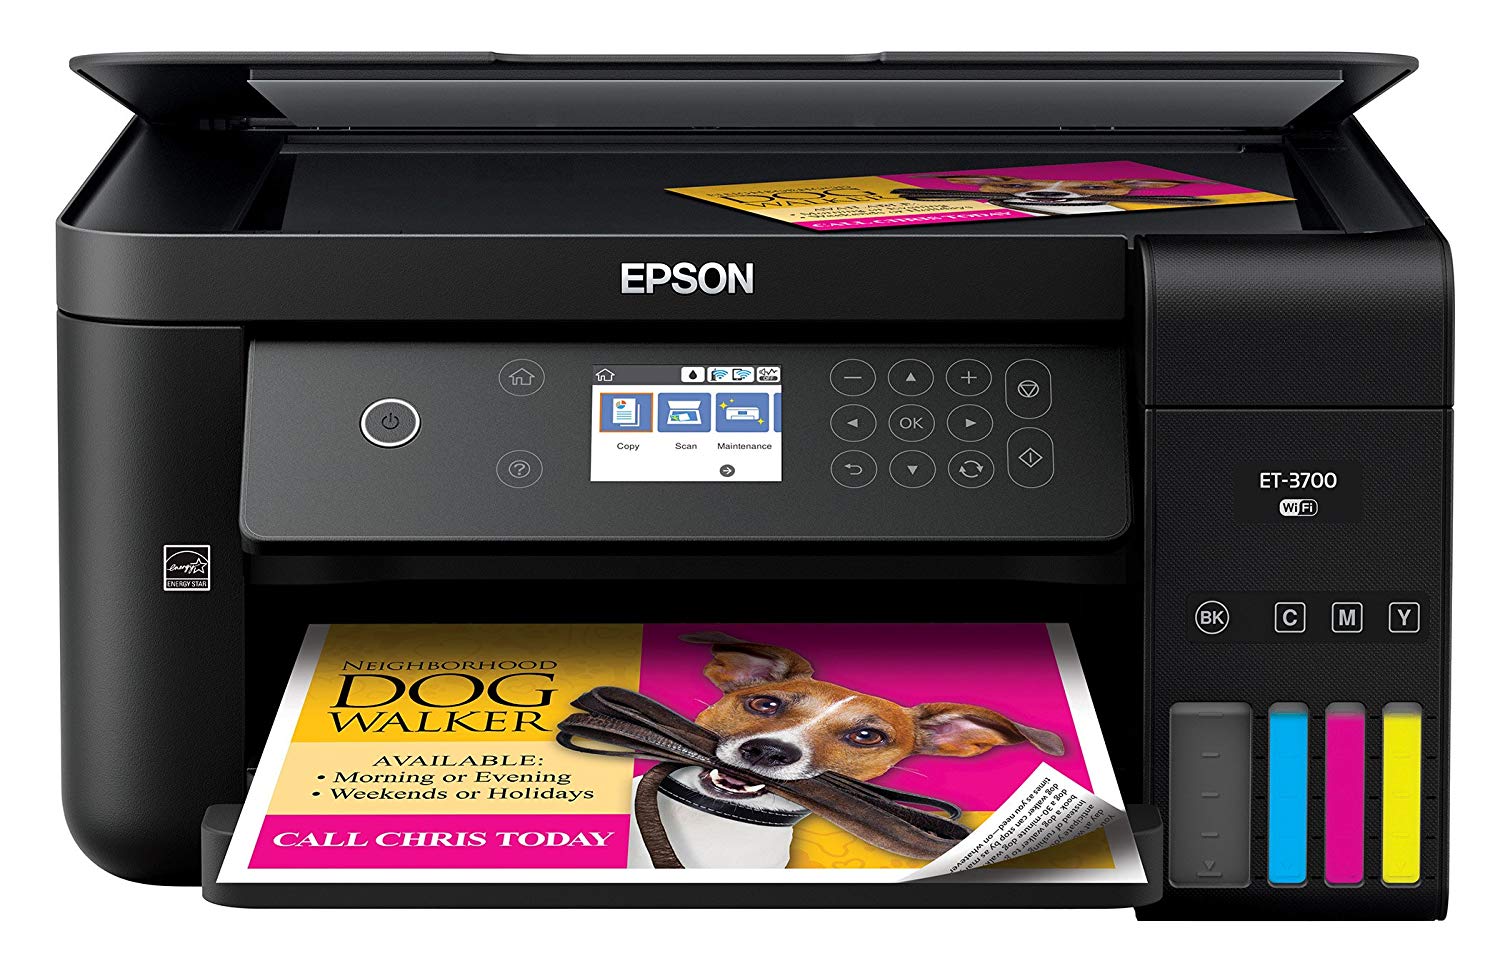 The 8 Best Epson EcoTank Printers in 2022 - Reviews and Comparison